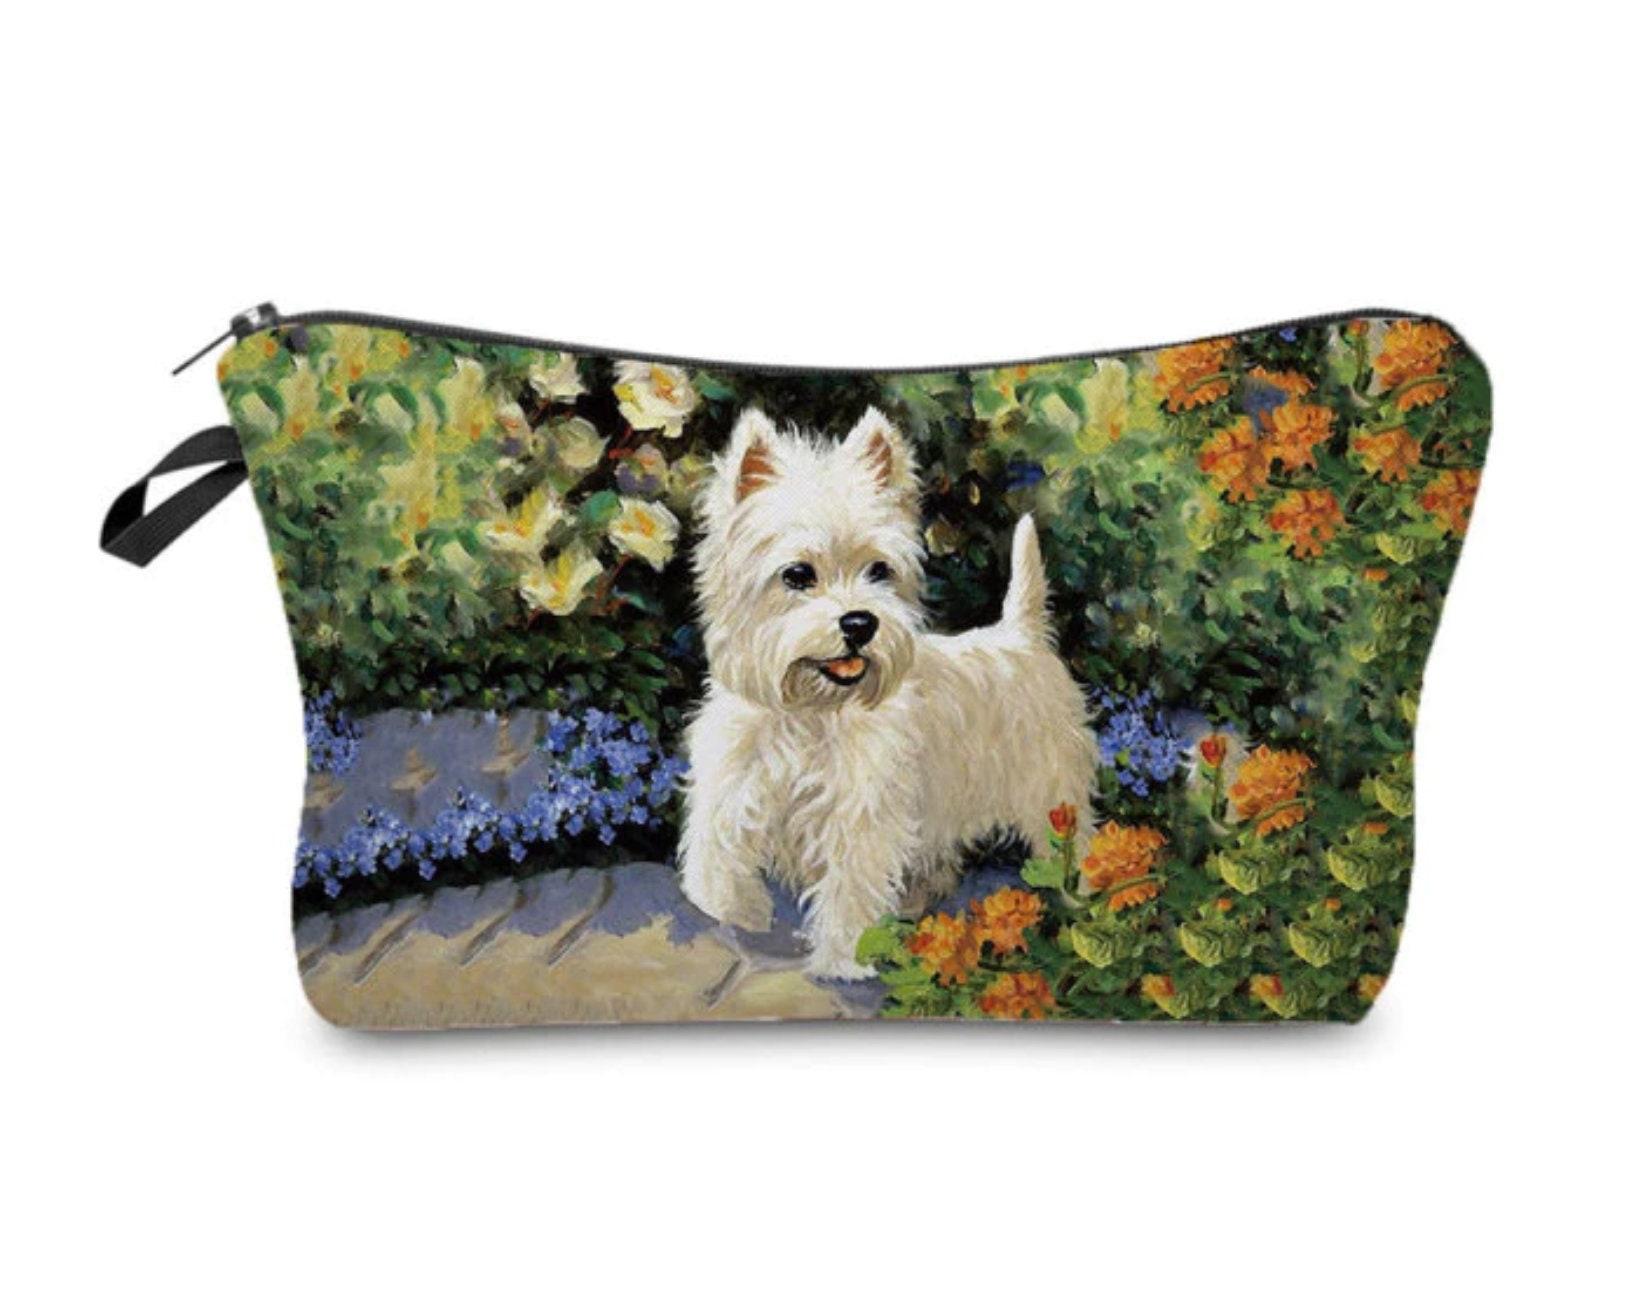 West Highland Terrier Westie Breed of Dog Zipper Lined Purse Pouch Perfect Gift 